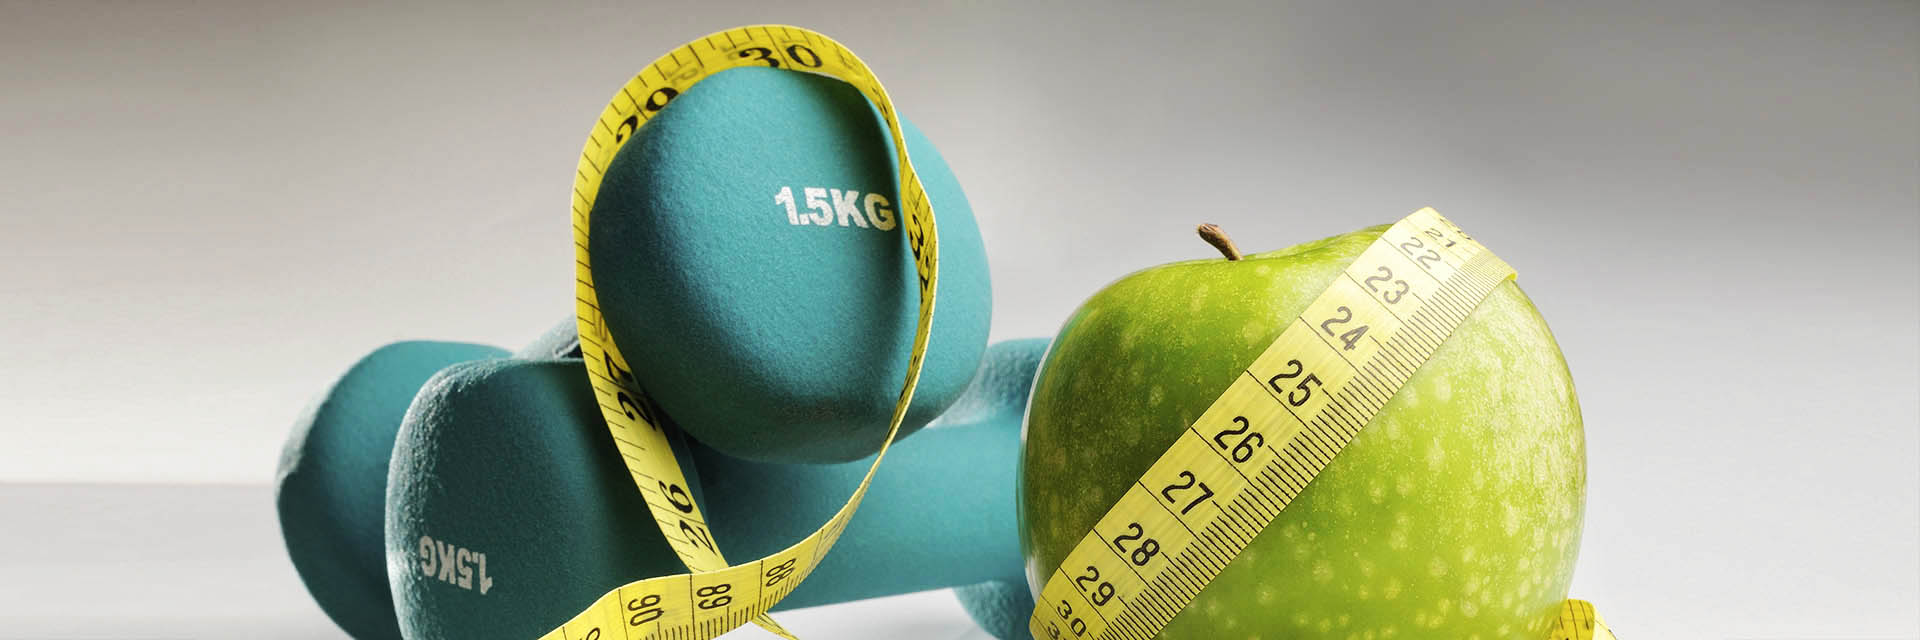 Apple, measuring tape, and dumbbells weights